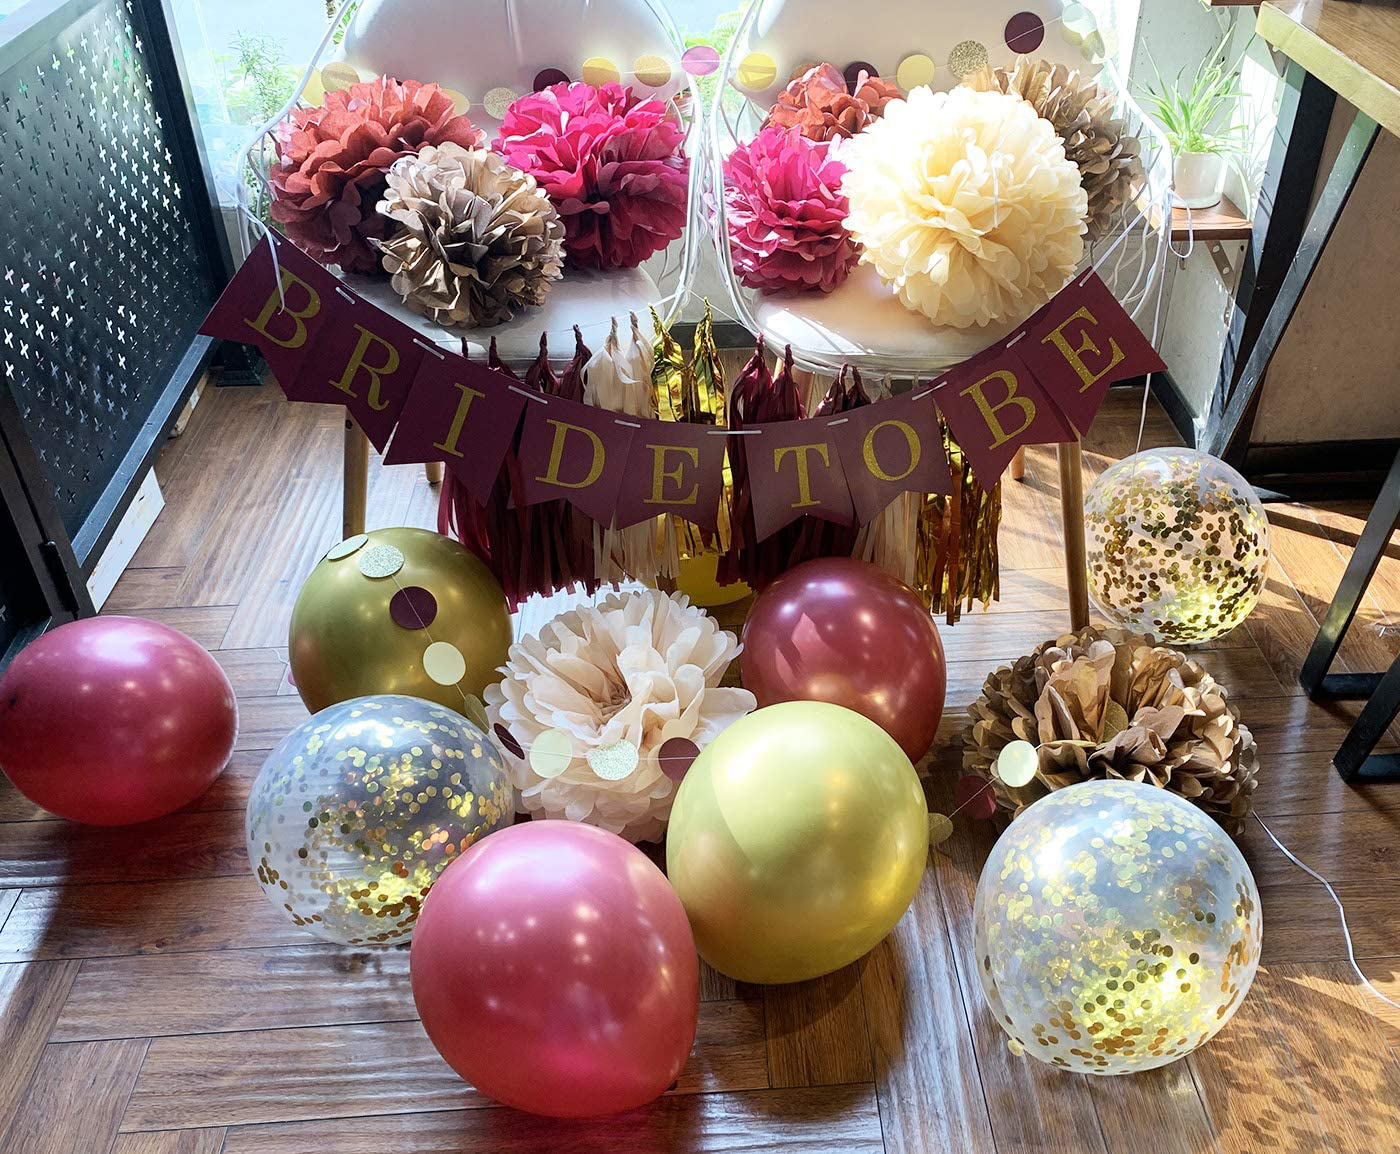 Maroon Gold 2021 Graduation Party Decorations/Burgundy Balloons for Birthday Decorations Women Qian's Party 30pcs Burgundy Gold Confetti Balloons for Burgundy Gold Bridal Shower Decorations/Maroon Gold Wedding Decorations